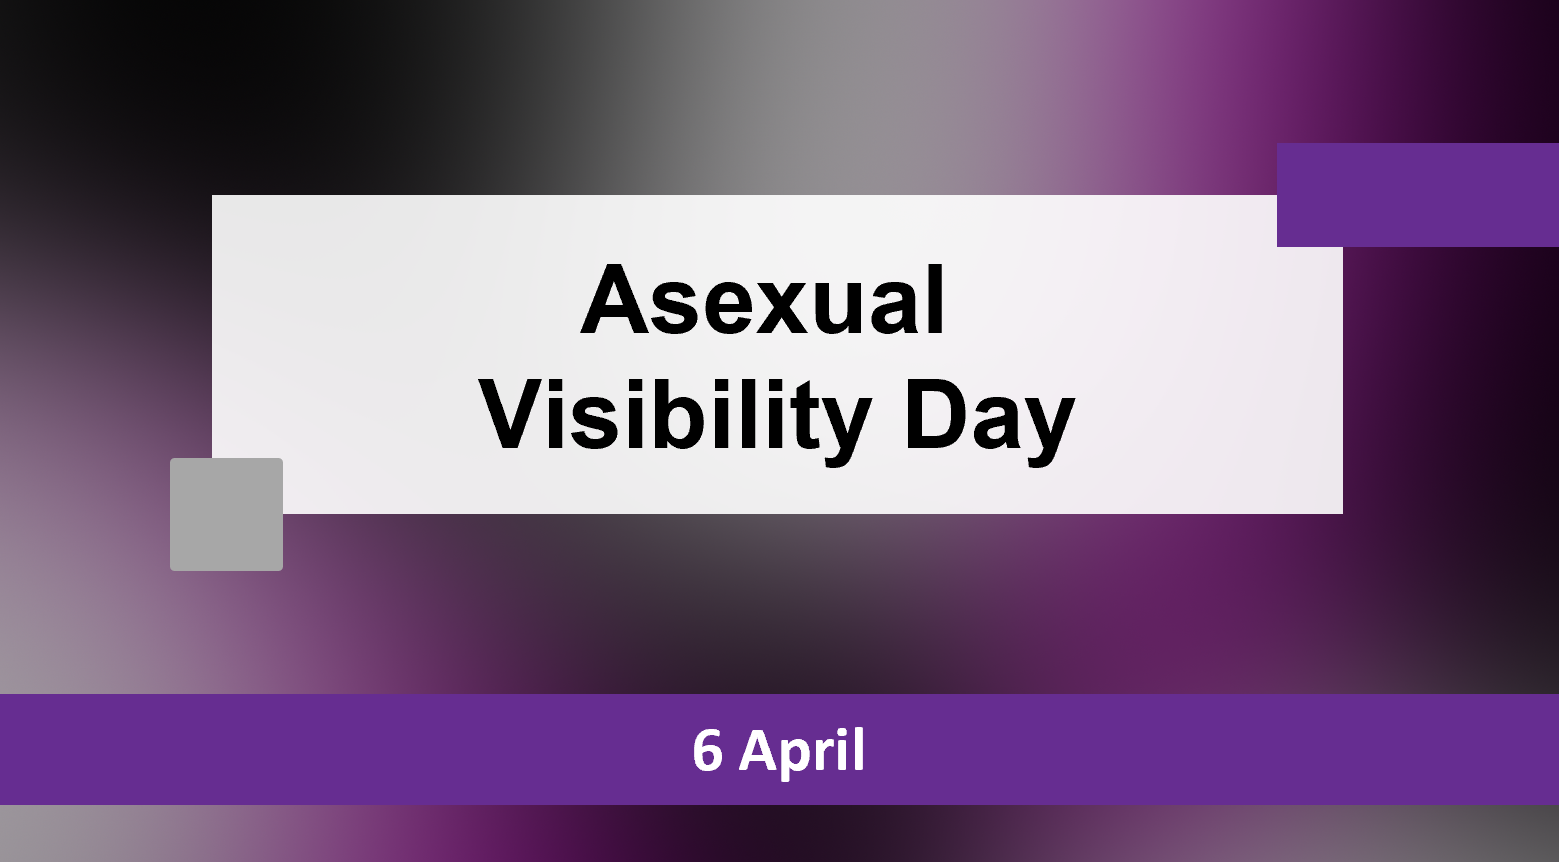 Abstract Aseuxal Flag, overlaid with "Asexual Visibility Day" 